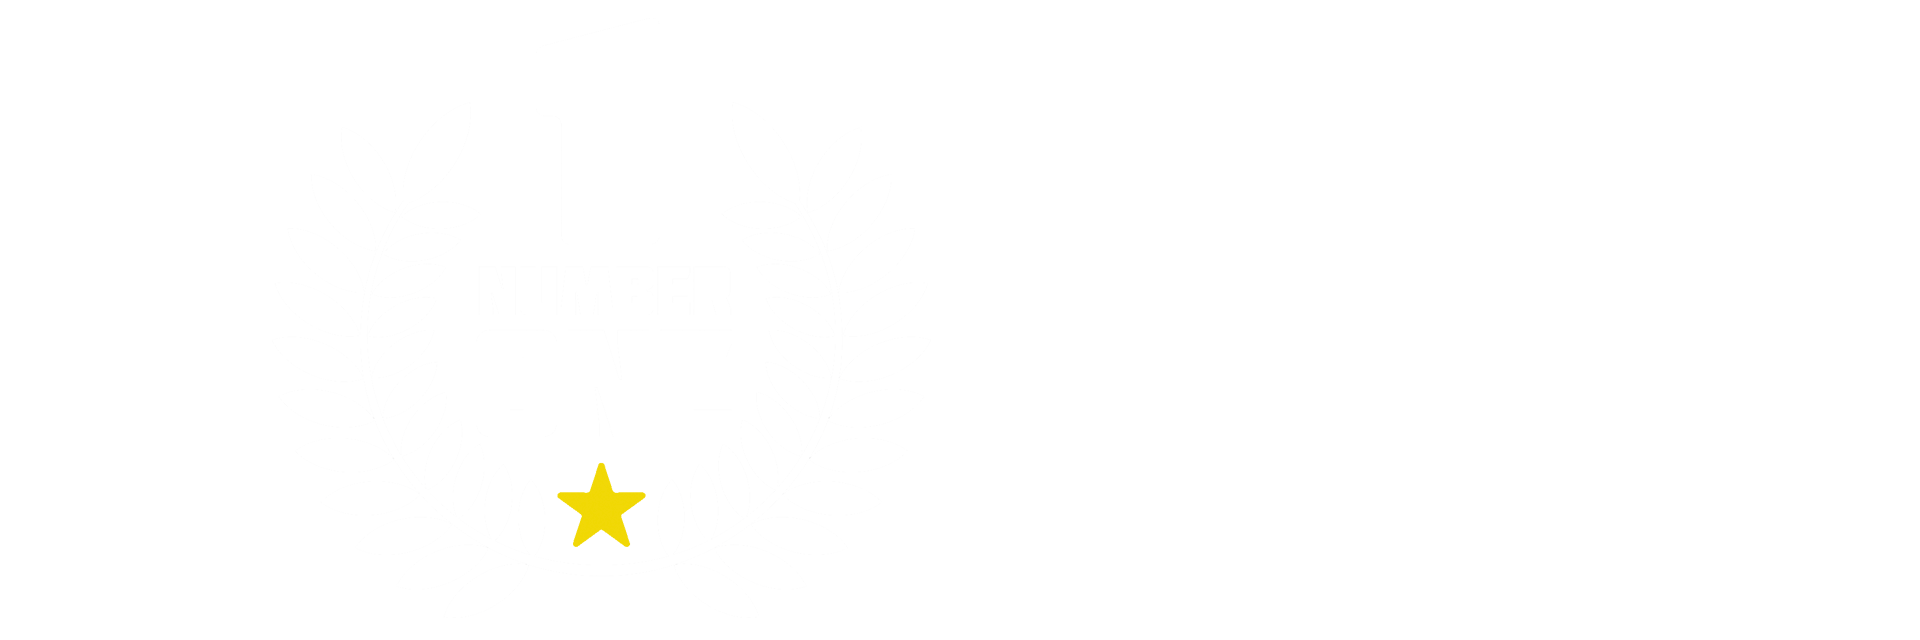 GO! Curriculum ranked number 1 by the Metro Children's Ministry Conference. "I absolutely loved the concept, creativity, and fresh approach this curriculum provides! The storytelling format was interactive, really placing the kids in the middle of the story. It was fun and engaging (even silly at times!) Right at the kids level." A KidMin curriculum and Sunday school lesson that leaders love as much as kids.